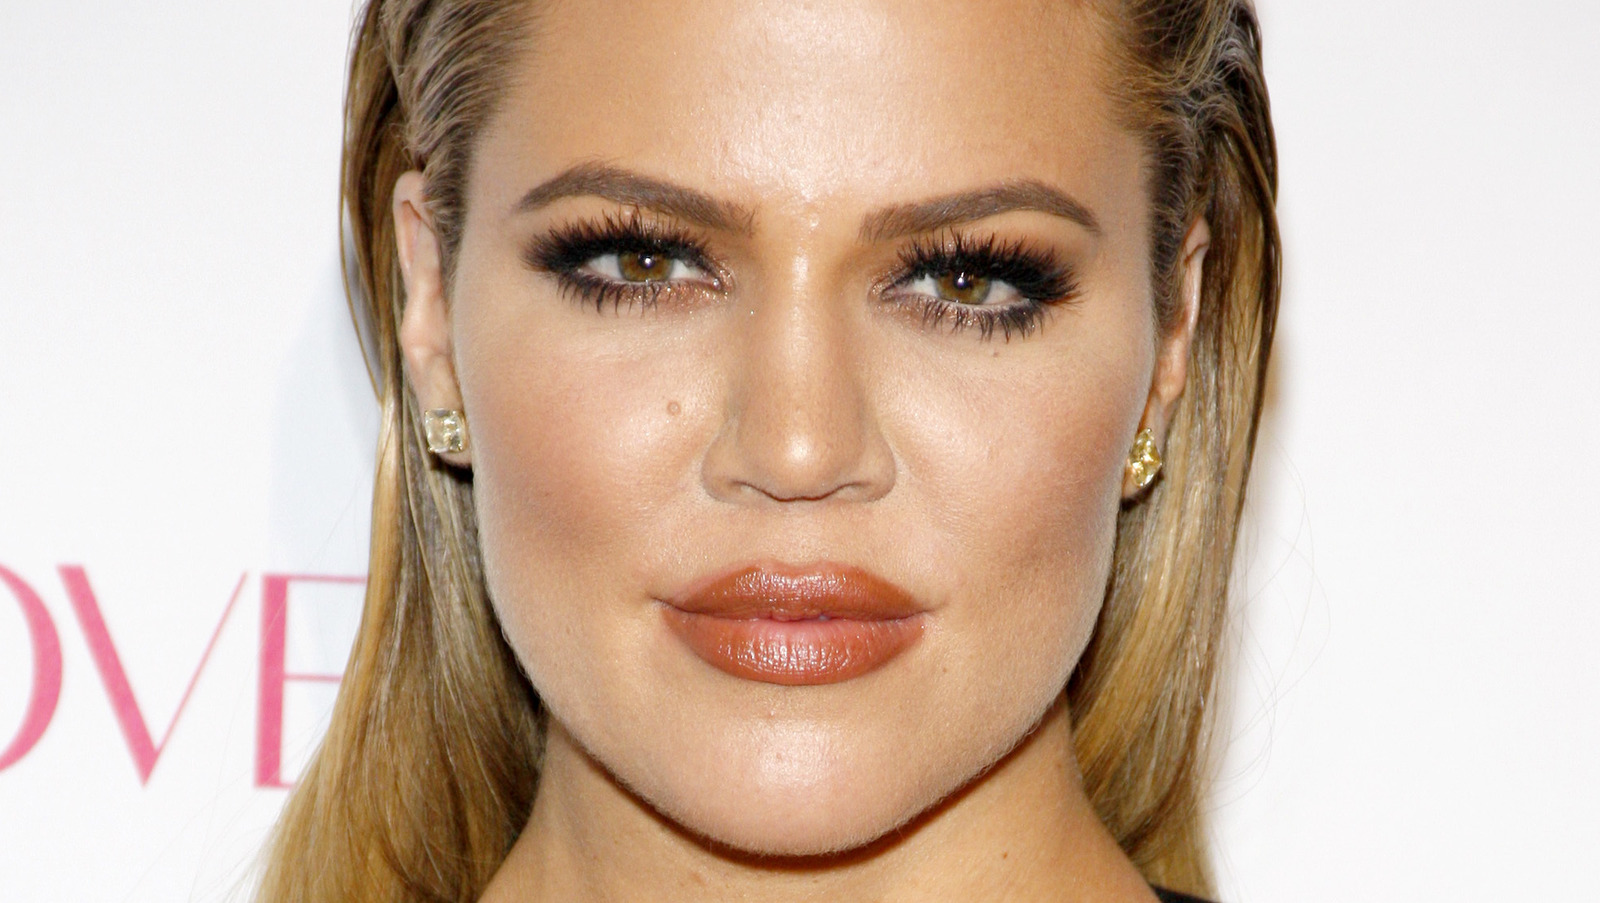 Khloe Kardashian Issues a Important PSA. Speculation about her Bandaged Face Heats Up